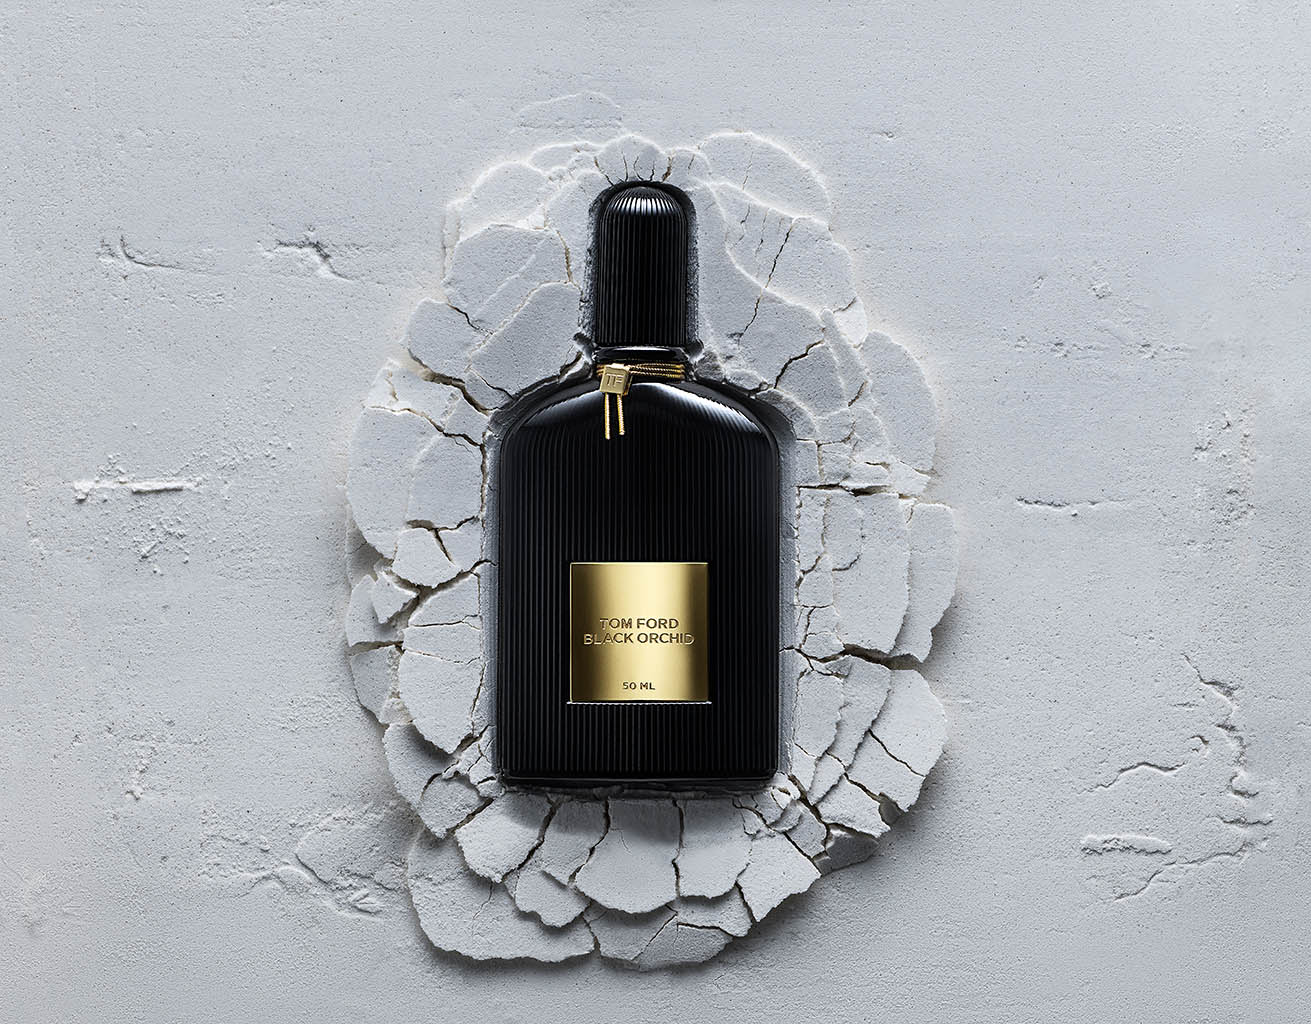 Creative Still Life Product Photography and Retouching of Tom Ford Black Orchid fragrance bottle by Packshot Factory